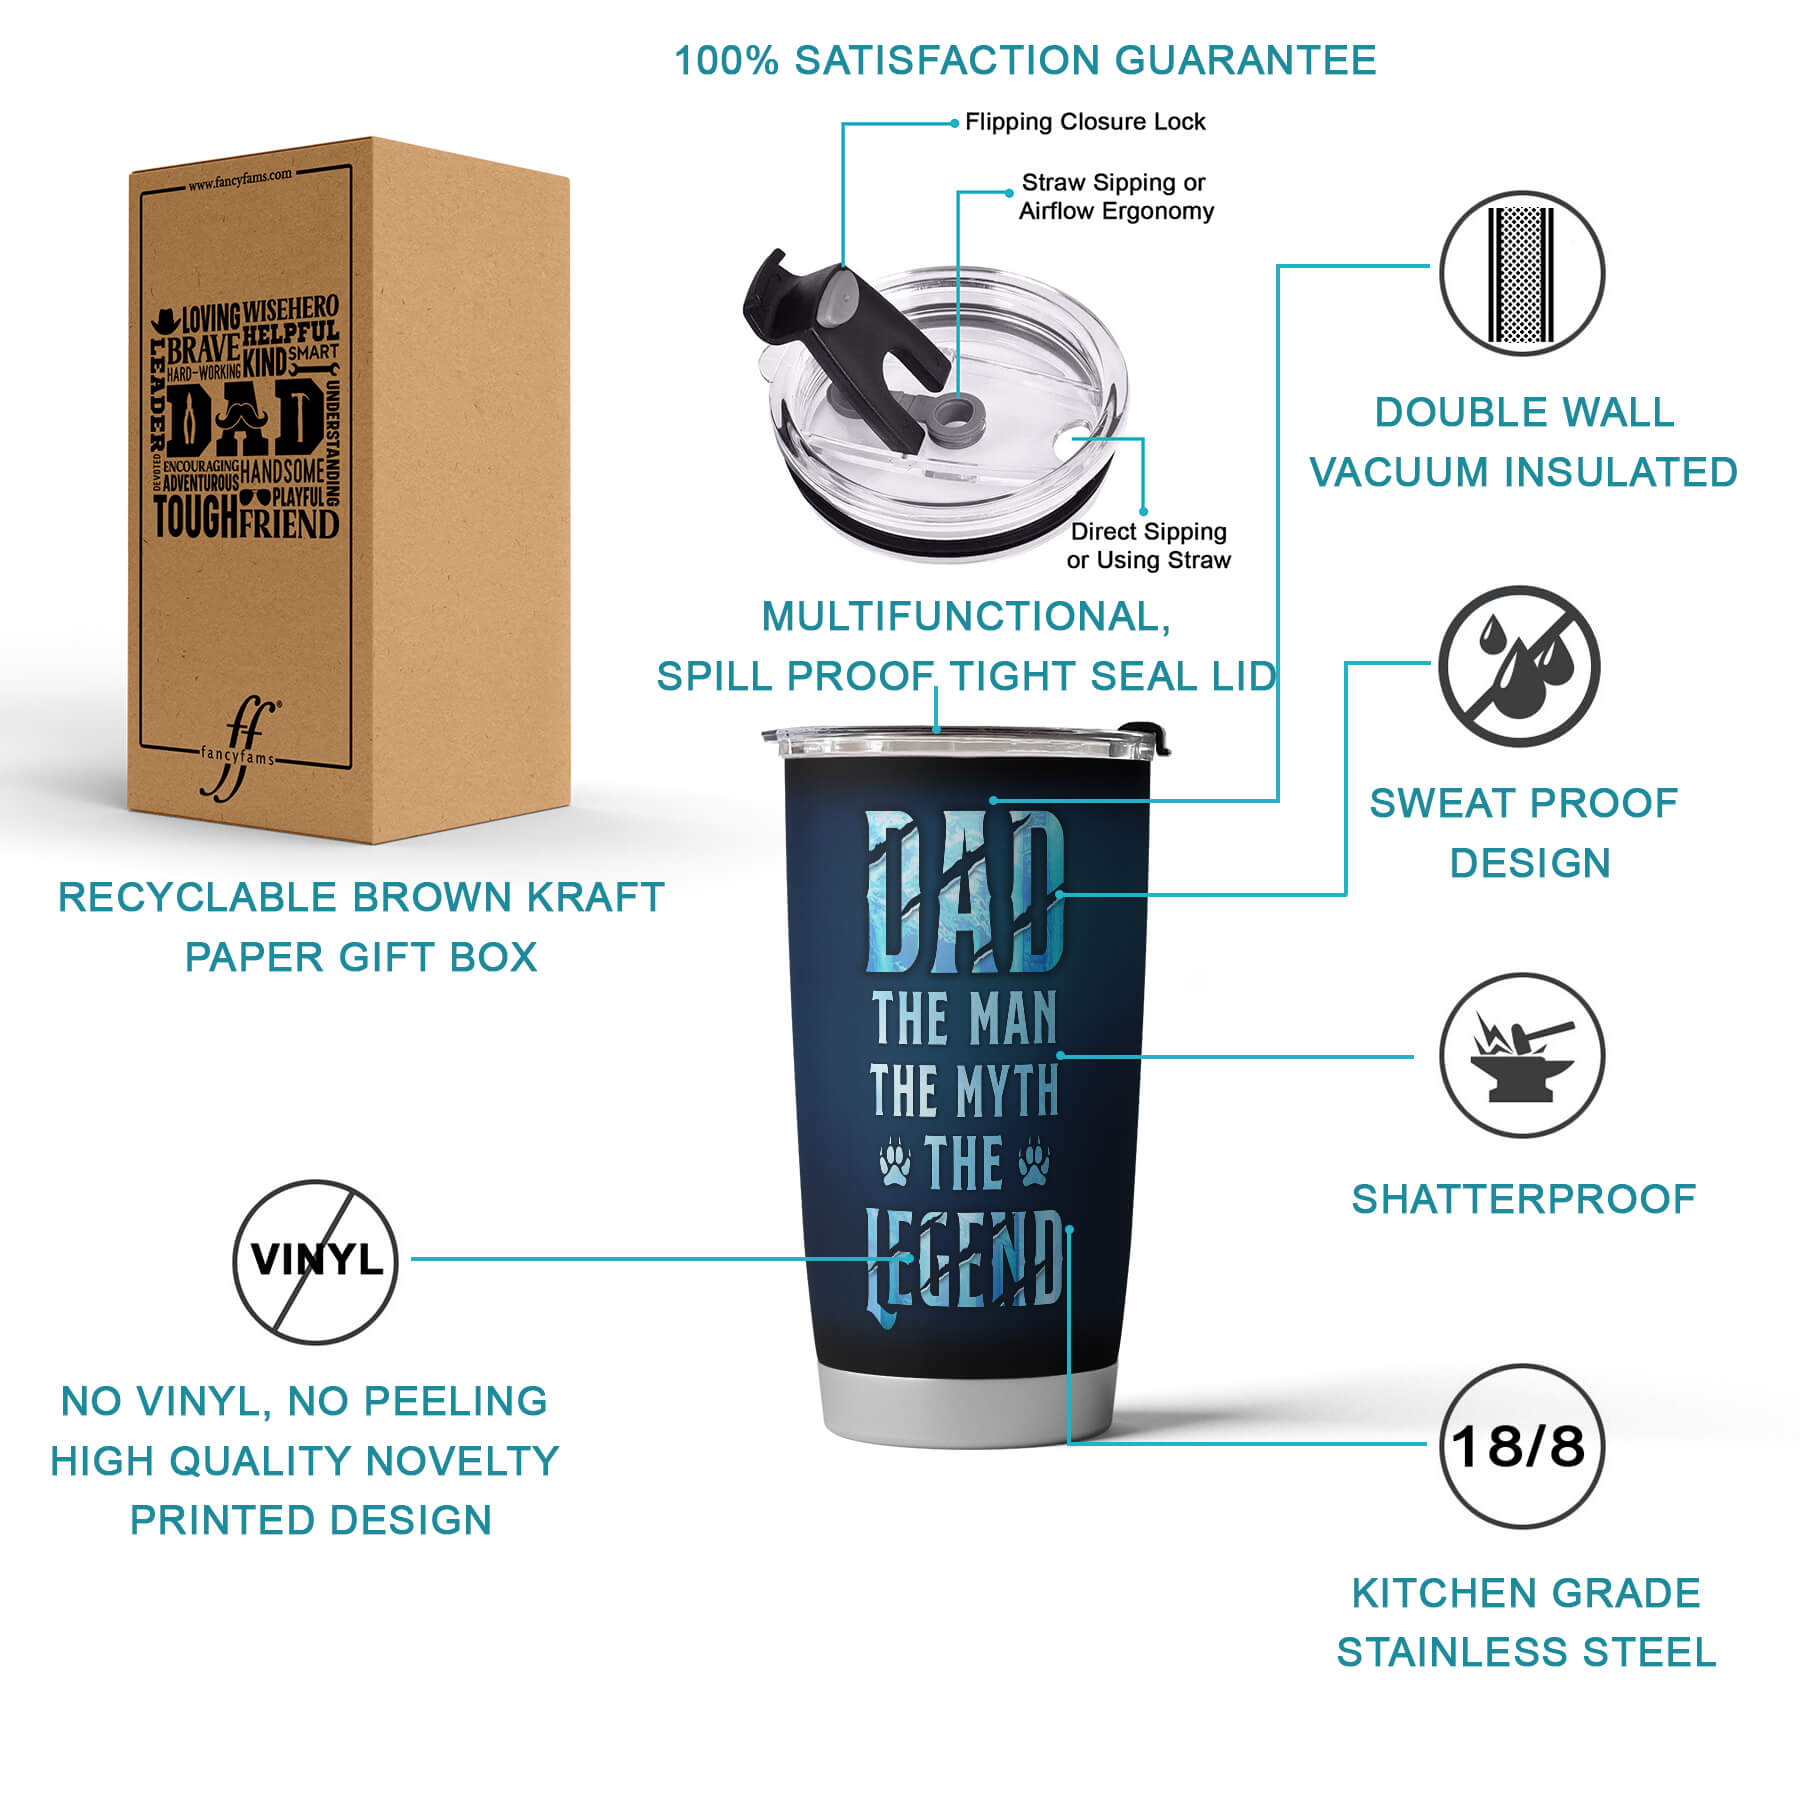 Gifts for Dad - 20 oz Lion Dad Blue stainless steel tumbler - fancyfams